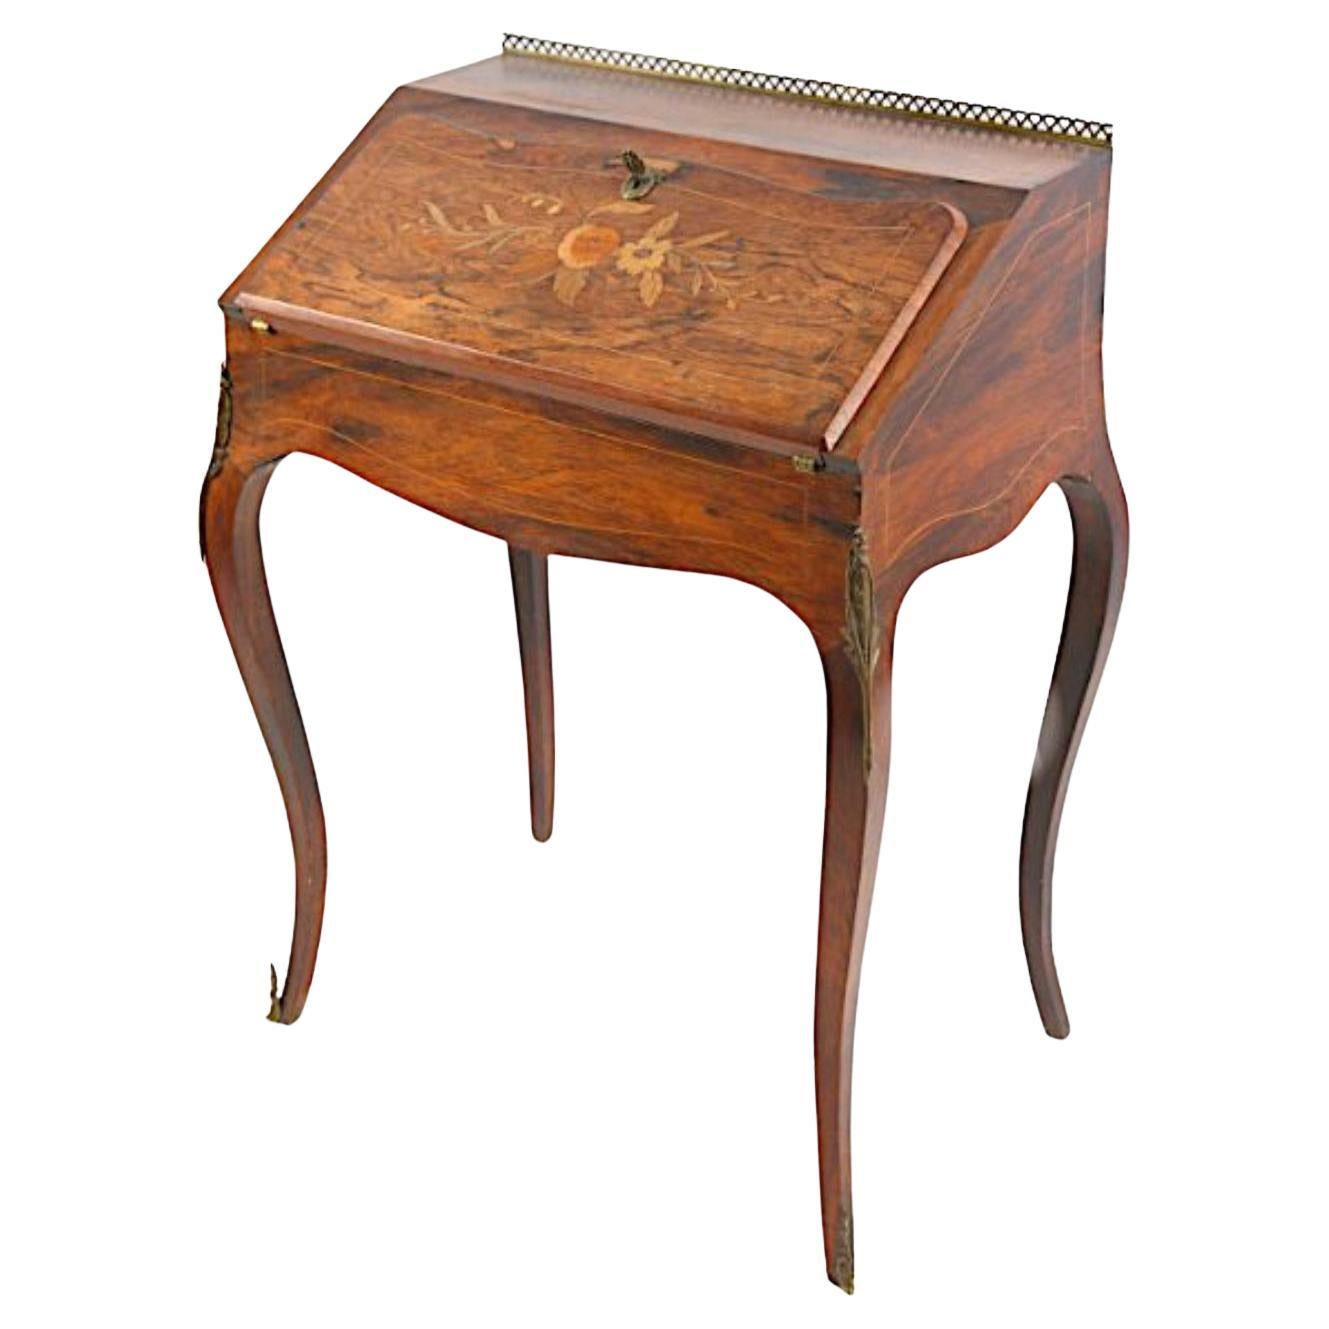 19th Century French Louis XV Inlaid Palisander Ladies Desk with Brass Ornaments For Sale